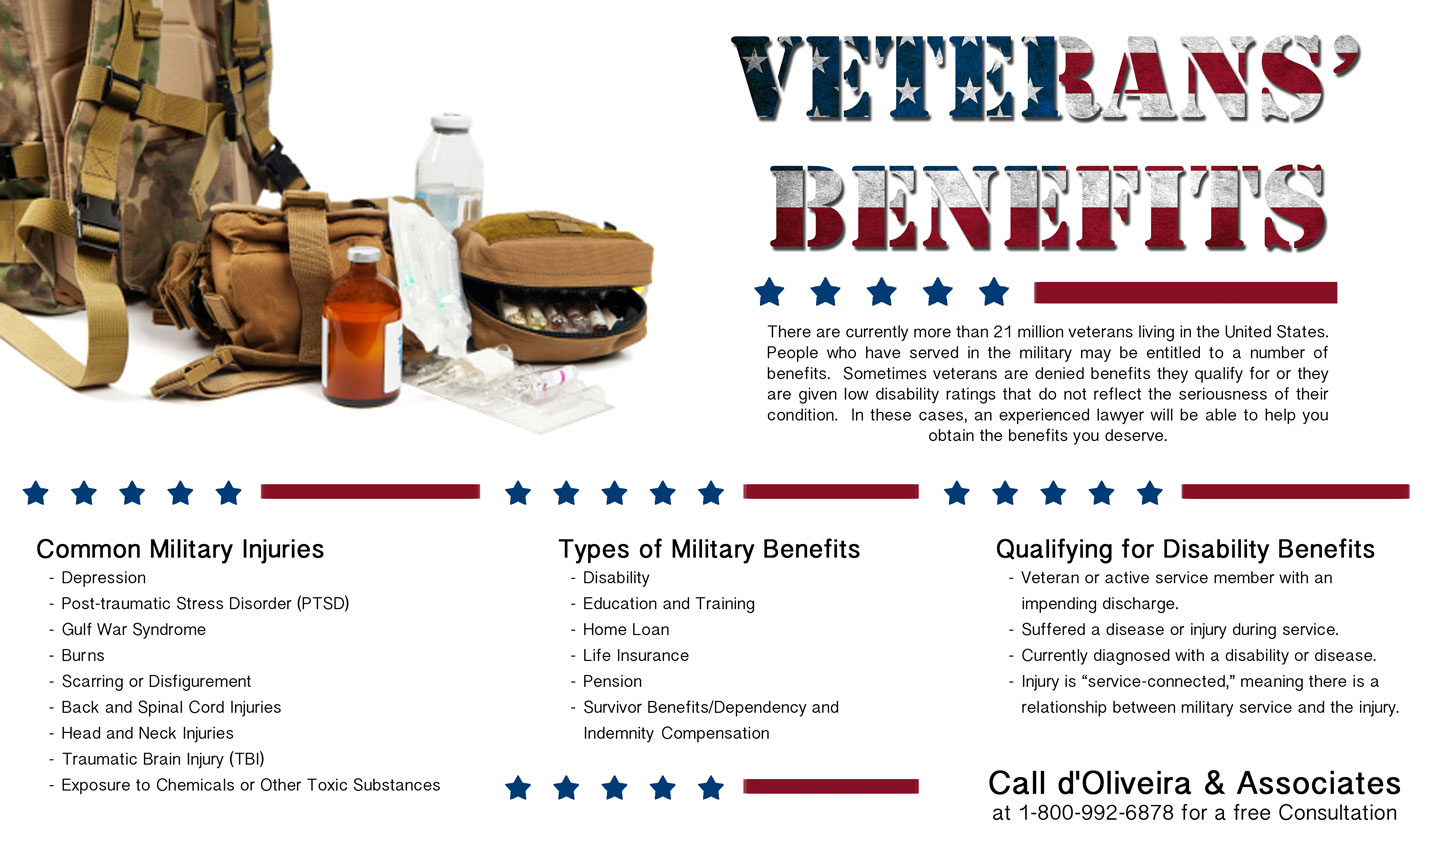 Rhode Island Lawyer Announces New Informational Graphic about VA Benefits